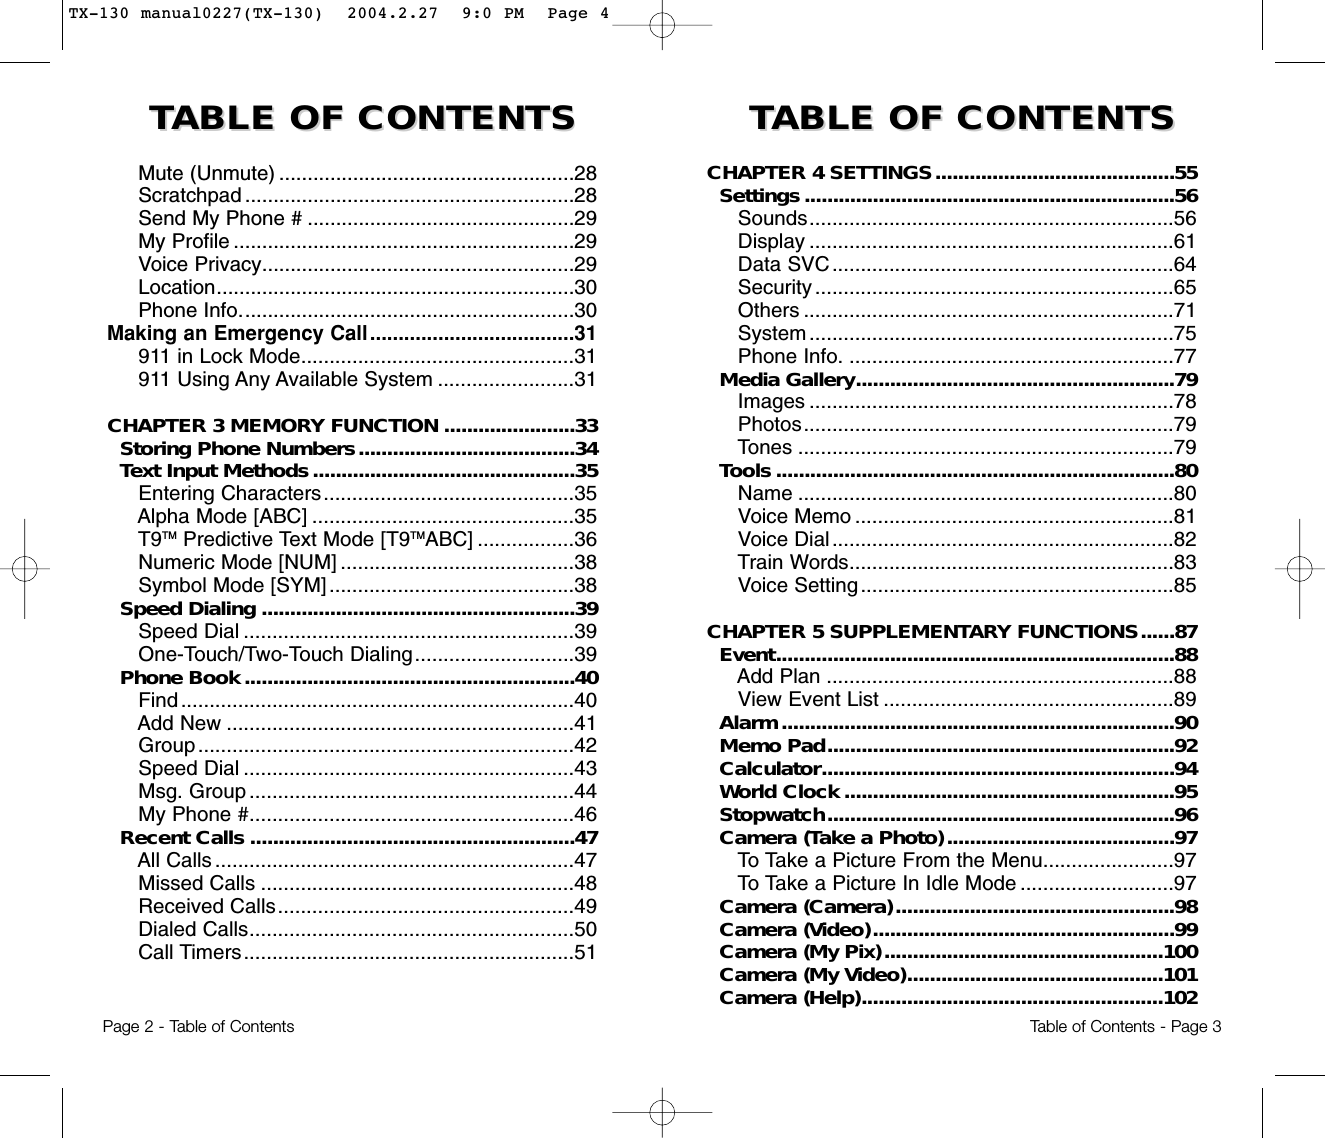 TTABLE OF CONTENTS ABLE OF CONTENTS  TTABLE OF CONTENTS ABLE OF CONTENTS CHAPTER 4 SETTINGS..........................................55Settings.................................................................56Sounds................................................................56Display ................................................................61Data SVC............................................................64Security ...............................................................65Others .................................................................71System ................................................................75  Phone Info. .........................................................77Media Gallery........................................................79Images ................................................................78Photos.................................................................79Tones ..................................................................79Tools ......................................................................80Name ..................................................................80Voice Memo ........................................................81Voice Dial ............................................................82Train Words.........................................................83Voice Setting.......................................................85CHAPTER 5 SUPPLEMENTARY FUNCTIONS......87Event......................................................................88Add Plan .............................................................88View Event List ...................................................89Alarm.....................................................................90Memo Pad.............................................................92Calculator..............................................................94World Clock ..........................................................95Stopwatch.............................................................96Camera (Take a Photo)........................................97To Take a Picture From the Menu.......................97To Take a Picture In Idle Mode ...........................97Camera (Camera).................................................98Camera (Video).....................................................99Camera (My Pix).................................................100Camera (My Video).............................................101Camera (Help).....................................................102Mute (Unmute) ....................................................28Scratchpad ..........................................................28Send My Phone # ...............................................29My Profile ............................................................29Voice Privacy.......................................................29Location...............................................................30Phone Info...........................................................30Making an Emergency Call....................................31911 in Lock Mode................................................31911 Using Any Available System ........................31CHAPTER 3 MEMORY FUNCTION .......................33Storing Phone Numbers......................................34Text Input Methods..............................................35Entering Characters............................................35Alpha Mode [ABC] ..............................................35T9TM Predictive Text Mode [T9TMABC] .................36Numeric Mode [NUM] .........................................38Symbol Mode [SYM] ...........................................38Speed Dialing .......................................................39Speed Dial ..........................................................39One-Touch/Two-Touch Dialing............................39Phone Book..........................................................40Find.....................................................................40Add New .............................................................41Group..................................................................42Speed Dial ..........................................................43Msg. Group .........................................................44My Phone #.........................................................46Recent Calls .........................................................47All Calls ...............................................................47Missed Calls .......................................................48Received Calls....................................................49Dialed Calls.........................................................50Call Timers..........................................................51Page 2 - Table of Contents Table of Contents - Page 3TX-130 manual0227(TX-130)  2004.2.27  9:0 PM  Page 4